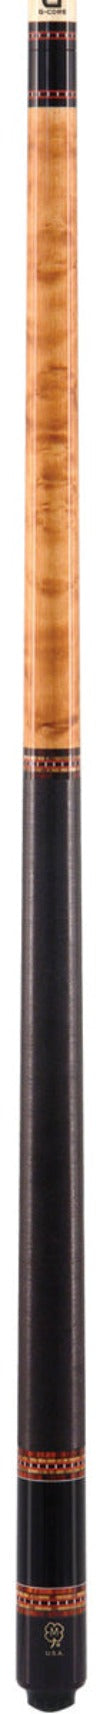 McDermott G225 with G-Core Shaft Pool Cue